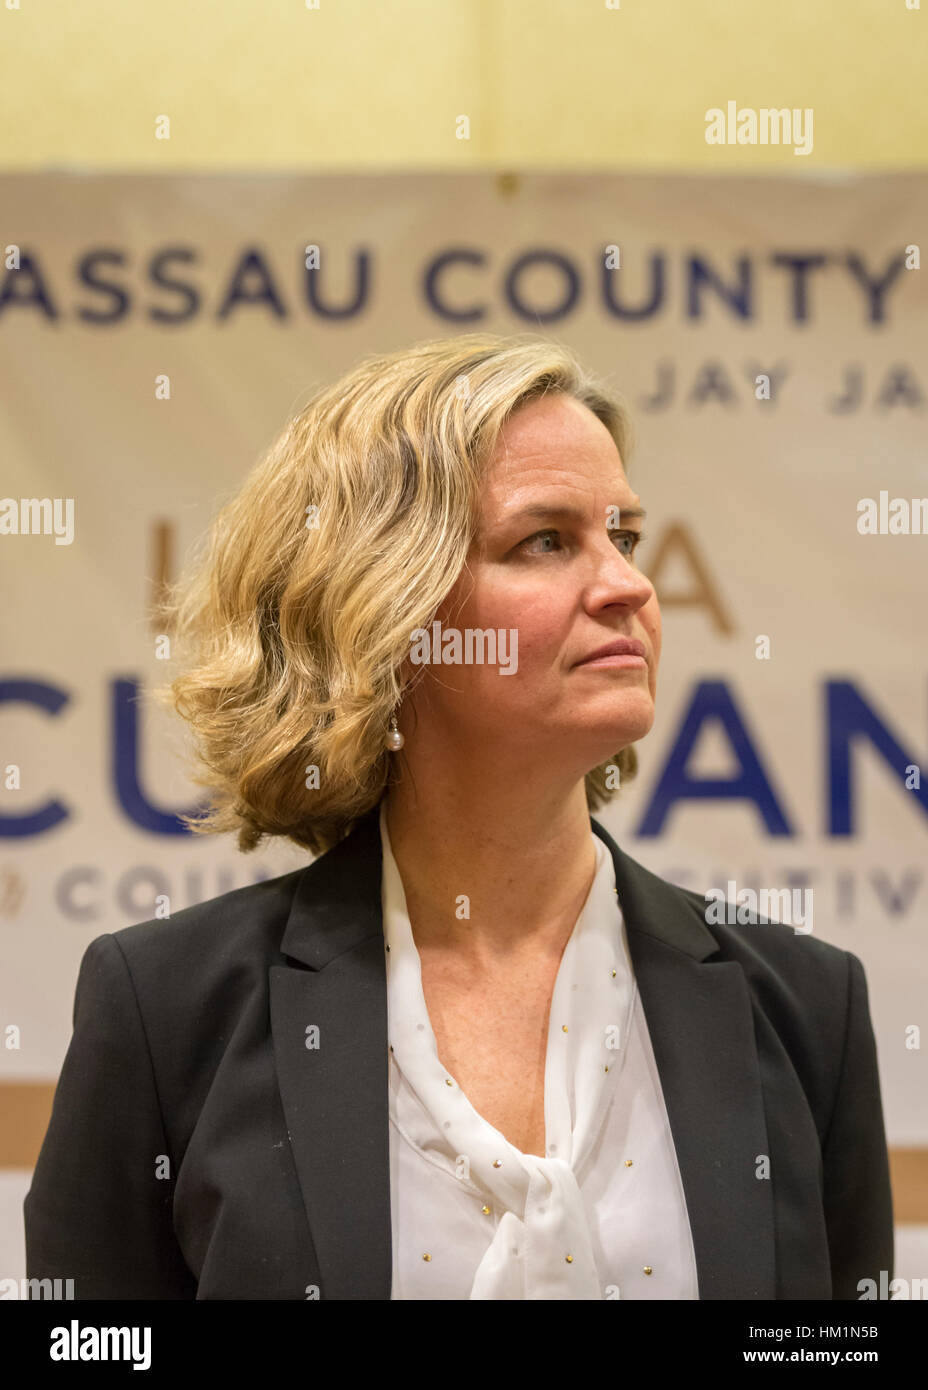 New York, USA. 30th Jan, 2017. Nassau County Legislator Laura Curran (D-Baldwin), 48, candidate for Nassau County Executive, receives endorsement from Democratic Party leaders. A primary is expected. Jay S. Jacobs, N. C. Democratic Committee Chairman, made the announcement backing Curren for County Exec and Jack Schnirman for County Comptroller. Curran is in her second term as Nassau County Legislator for 5th Legislative District. Credit: Ann E Parry/Alamy Live News Stock Photo